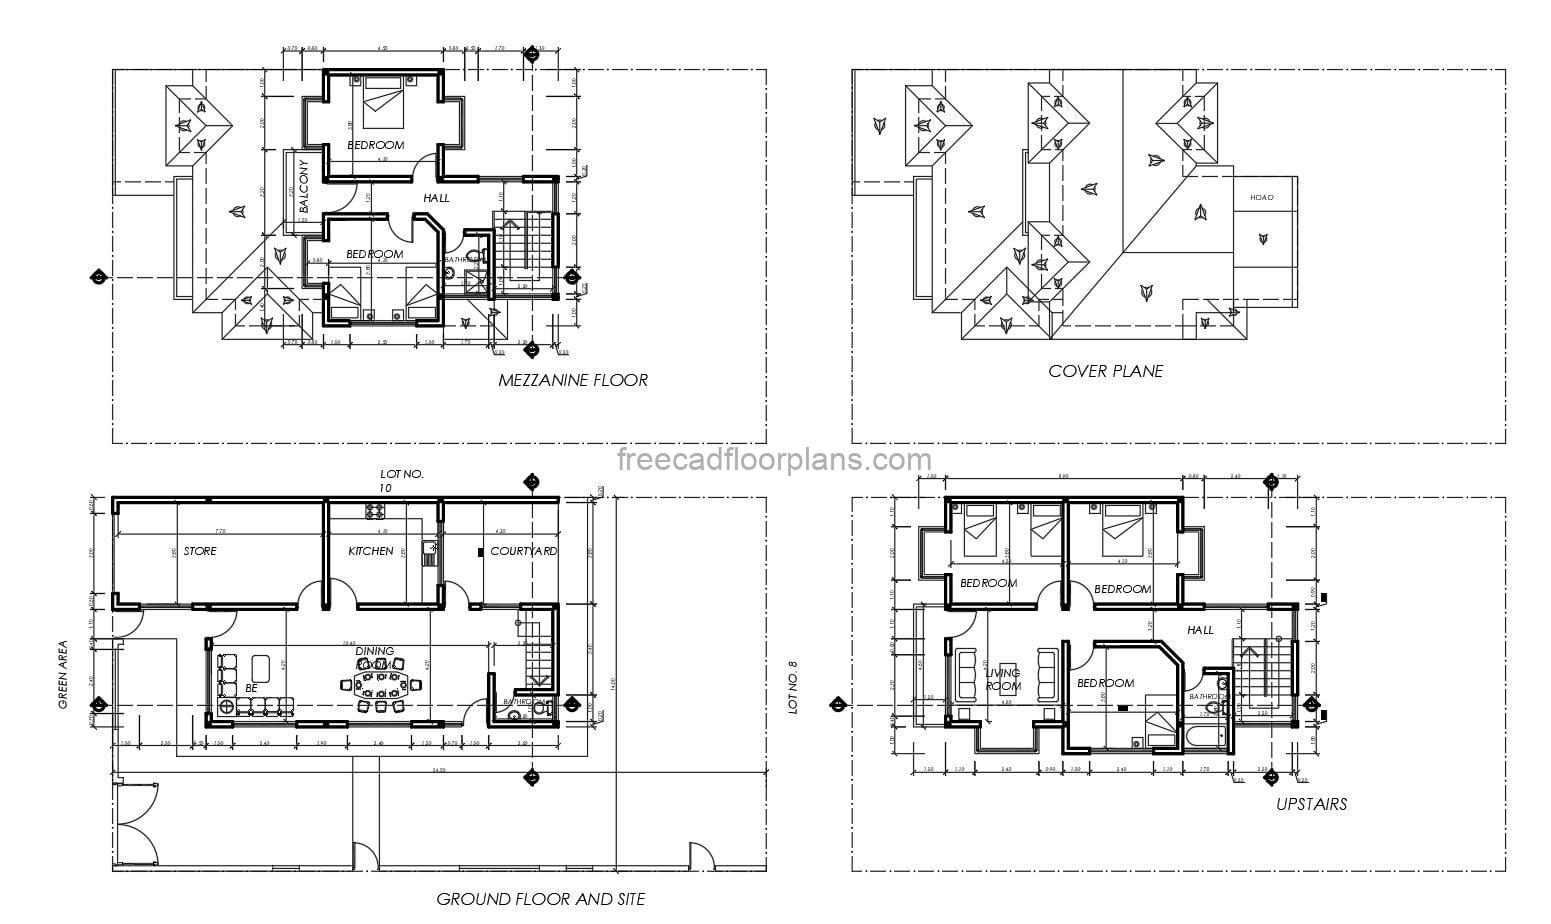 architectural and dimensioned plans of a three level residence with five bedrooms in total, autocad block plans in interior, facades, sections, architectural floor plan, dimensioned, construction details. free downloadable plans in autocad dwg format.